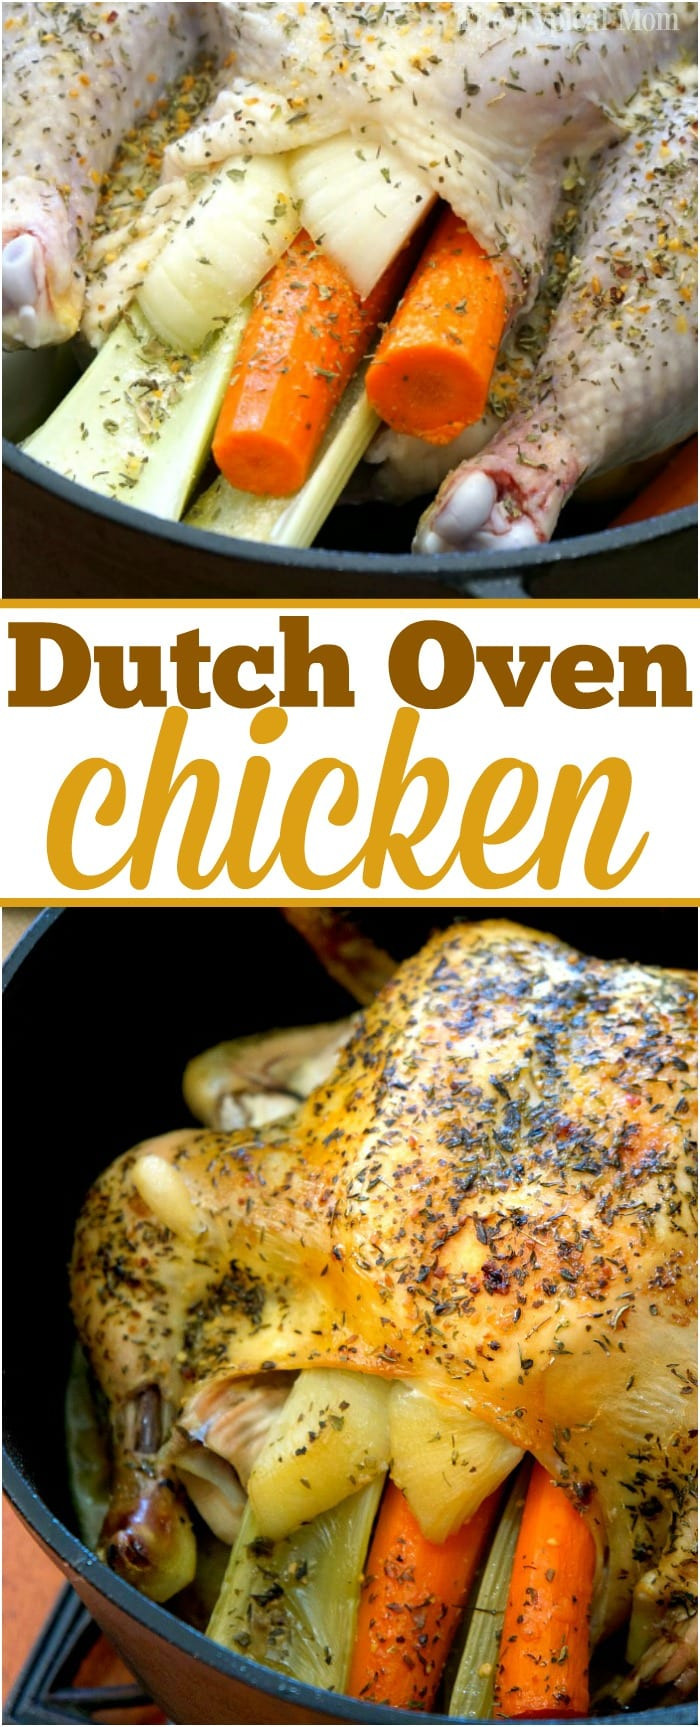 Dutch Oven Whole Chicken
 Dutch Oven Whole Chicken · The Typical Mom